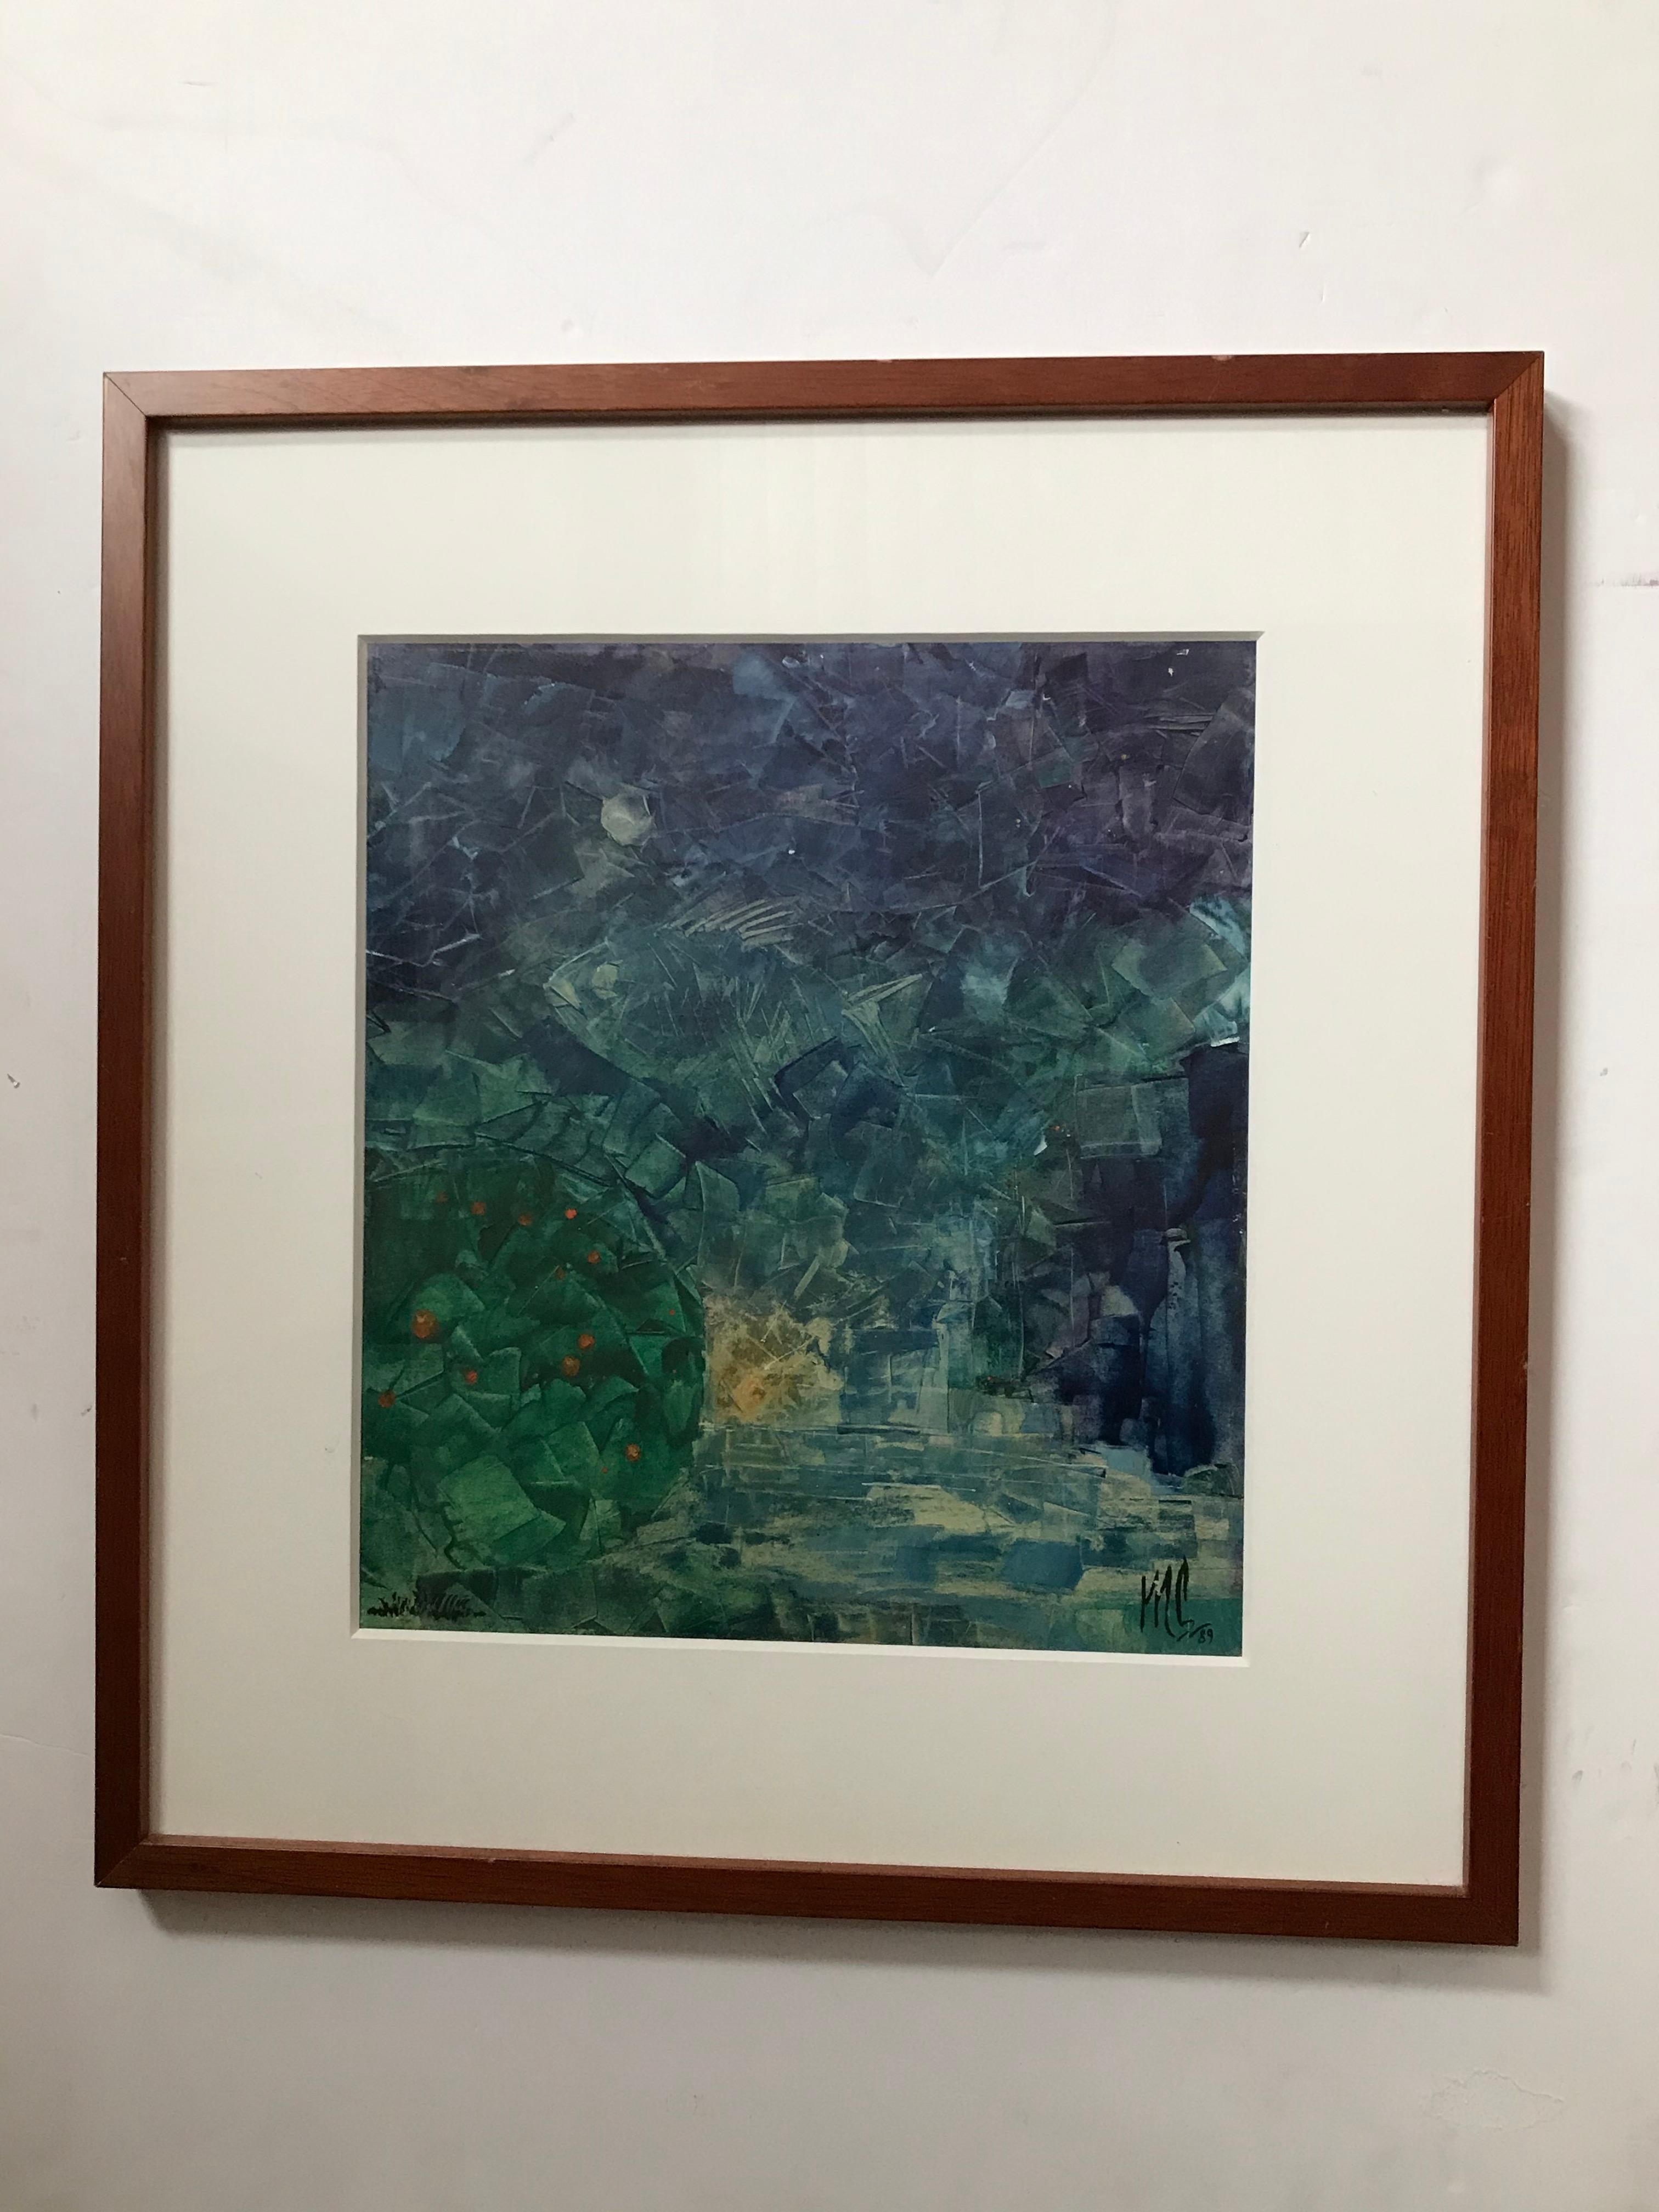 This illegibly signed semi-abstract watercolor, dated from 1989, features a captivating and dreamy representation of sub-aquatic life. The technique used in this piece creates a deep, contrasted atmosphere with gradations of colors tints. The